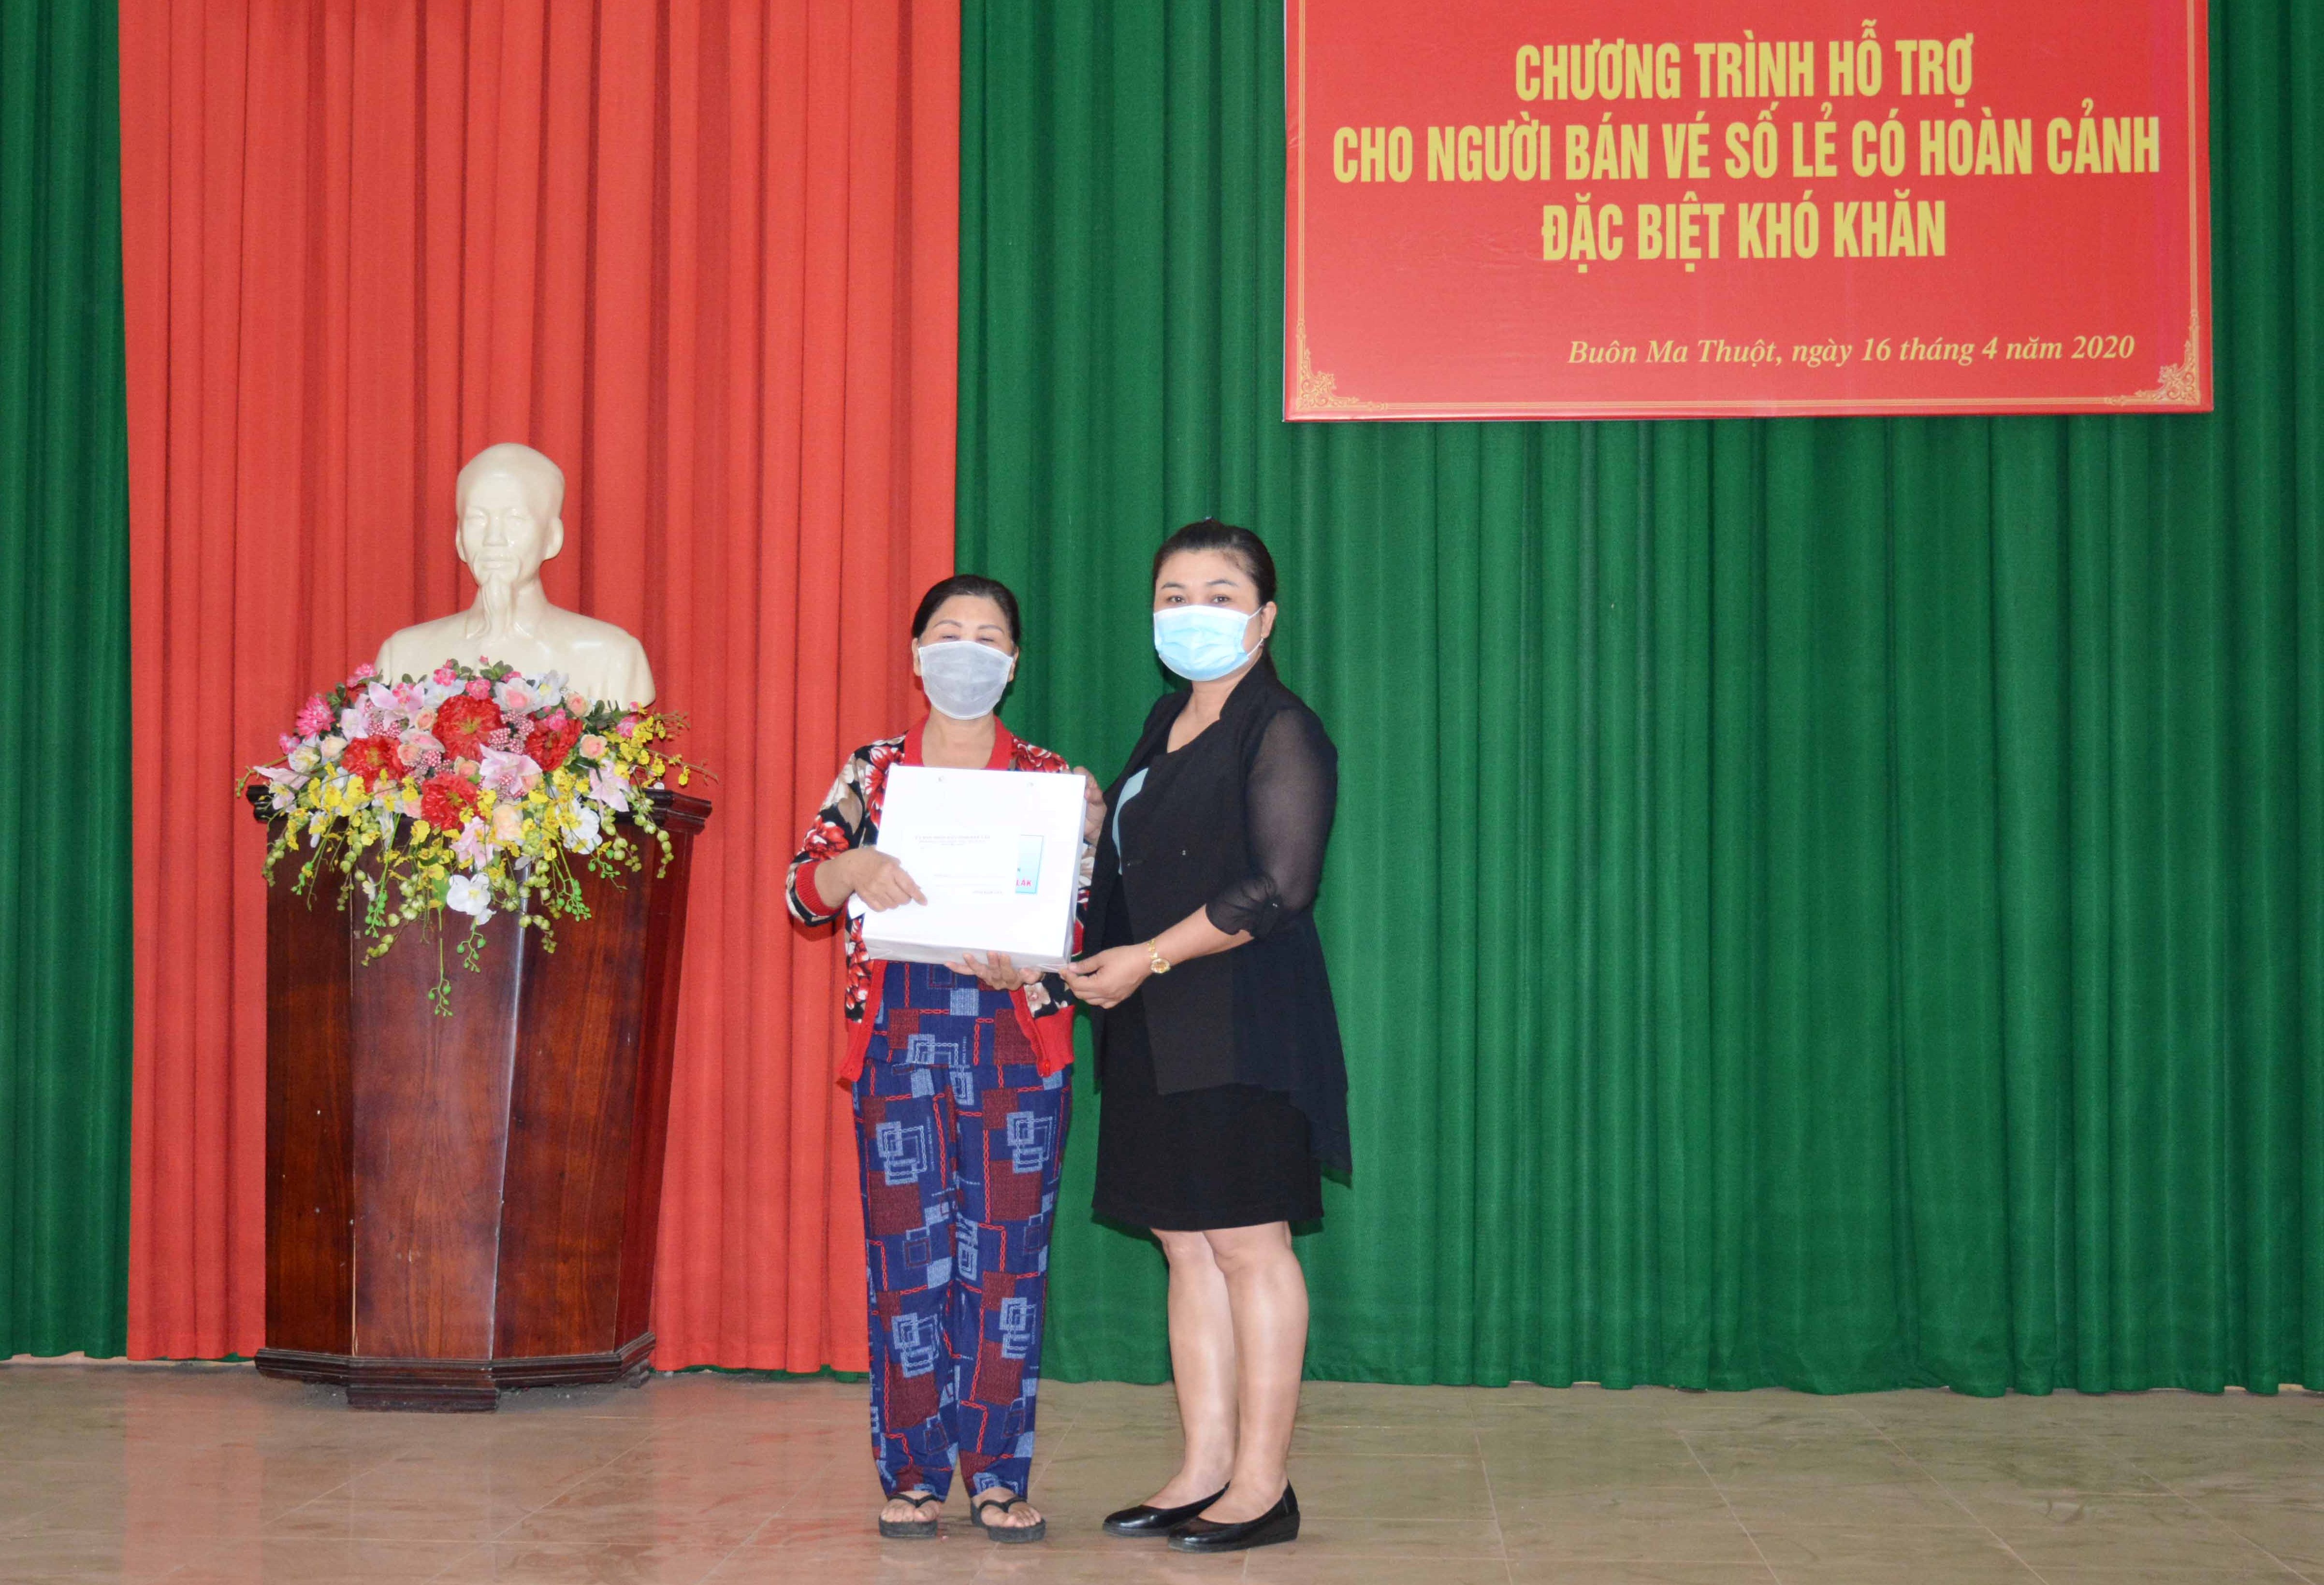 Dak Lak earmarks VND 650 million for the poor people amid Covid-19 pandemic